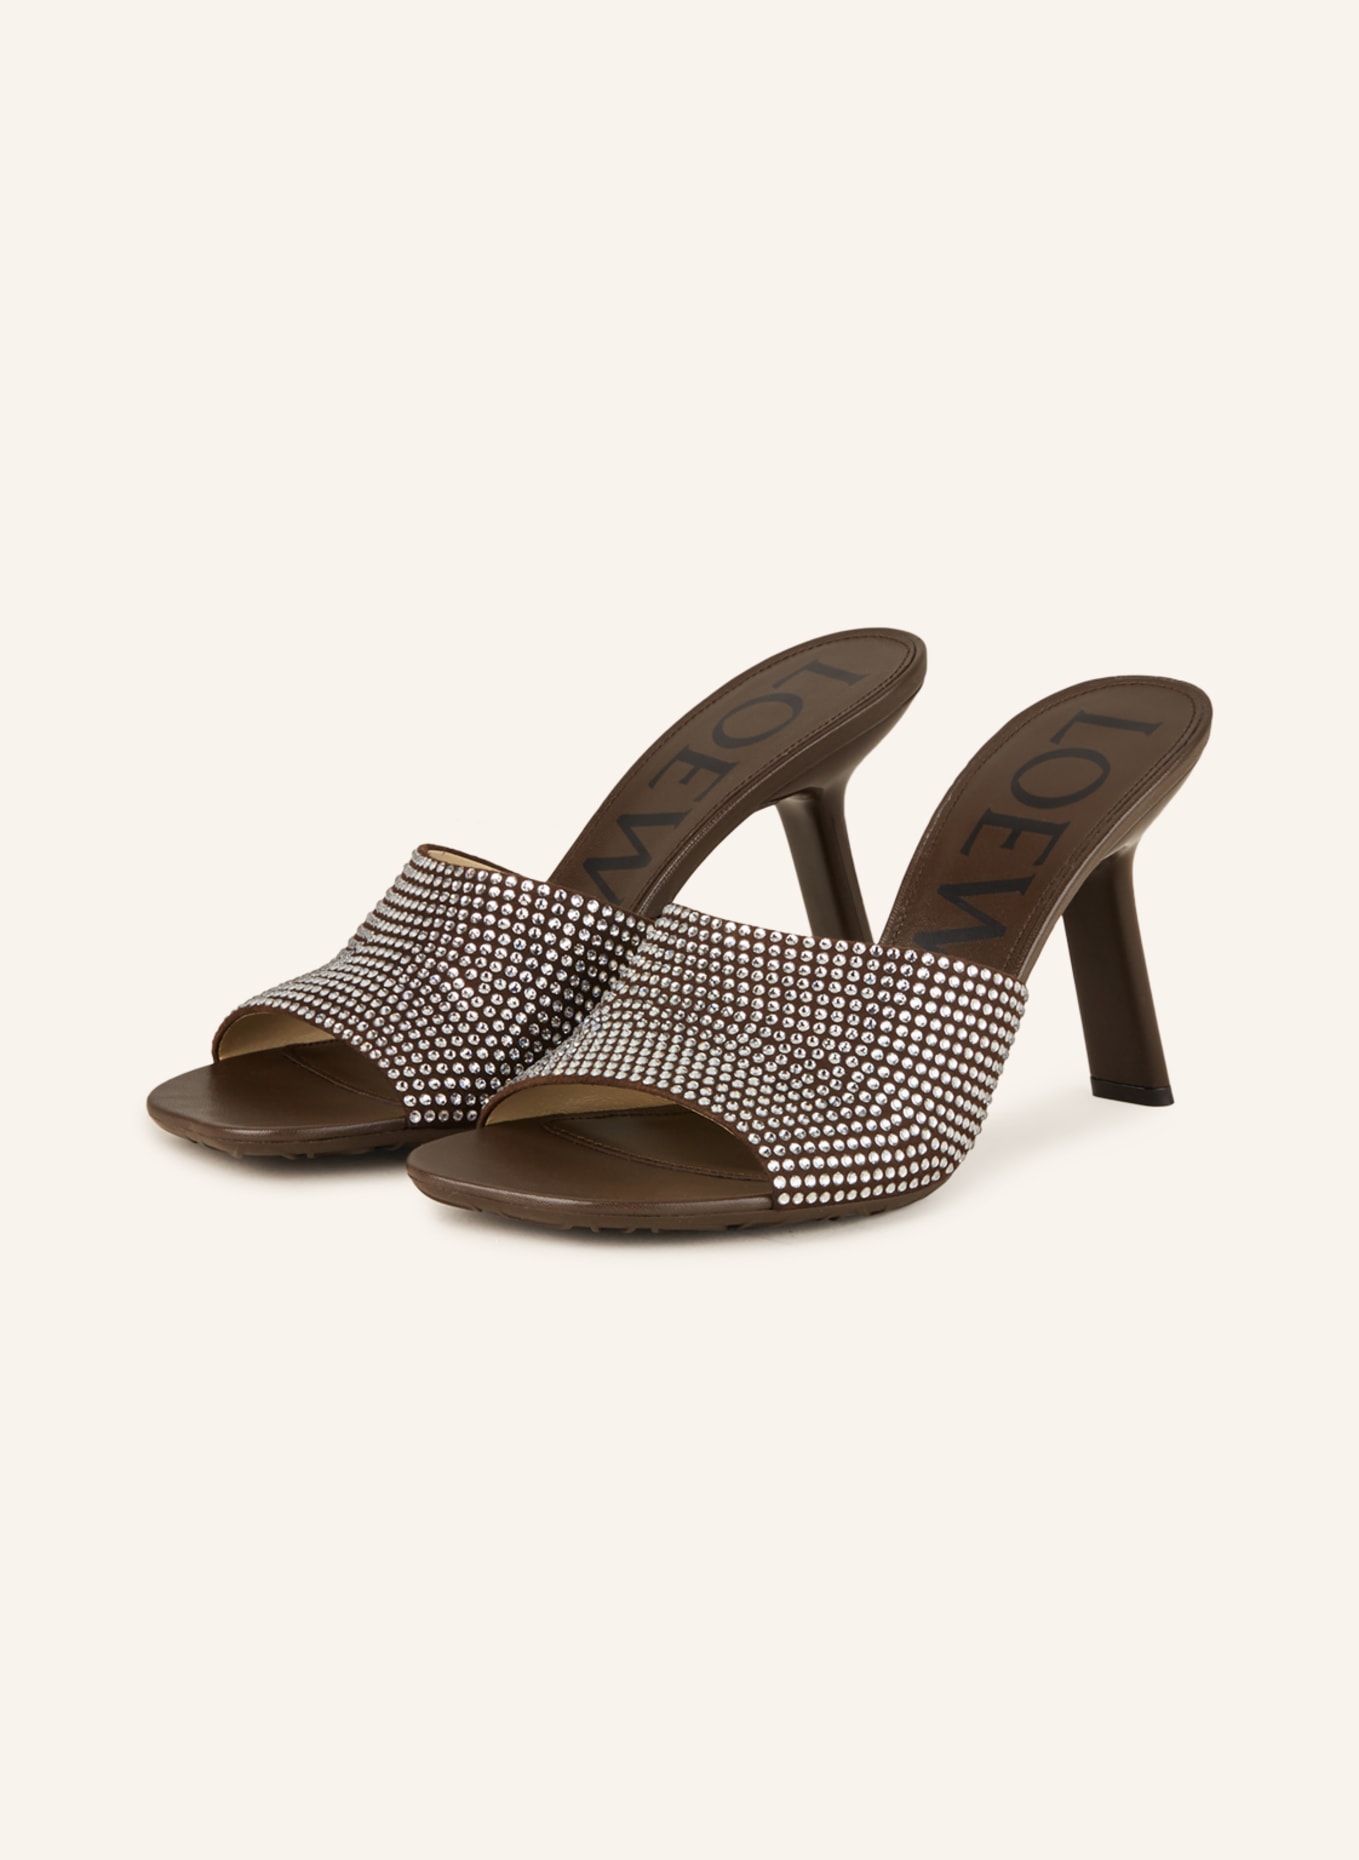 LOEWE Mules with decorative gems, Color: BROWN (Image 1)